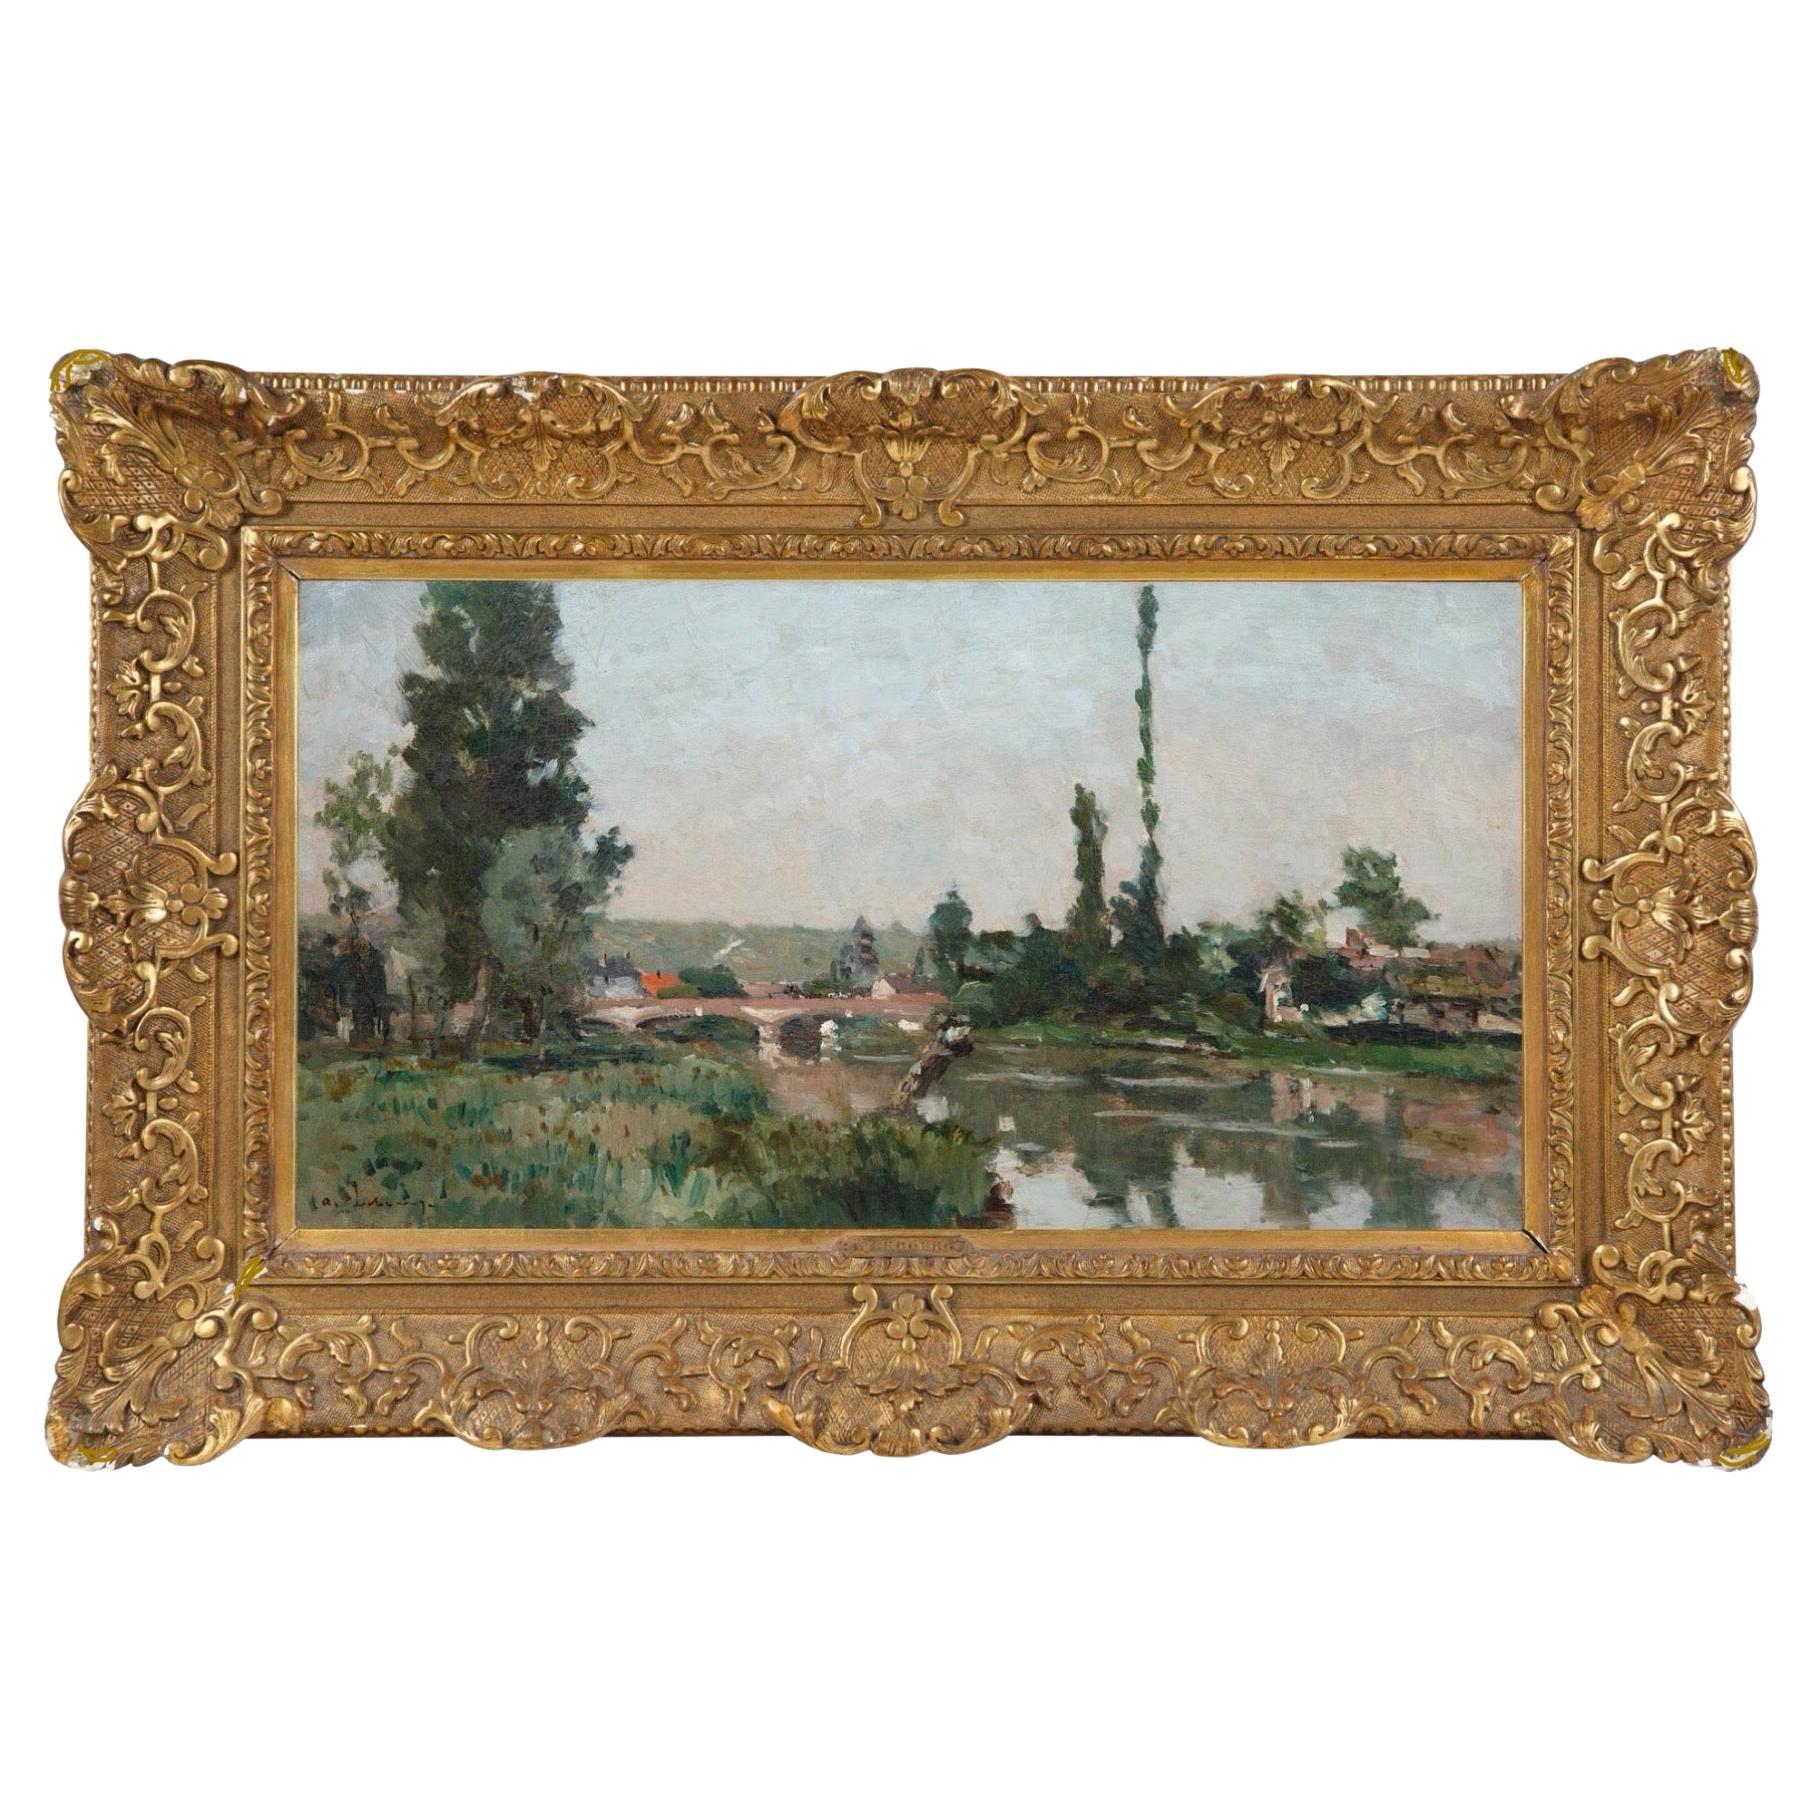 Albert Lebourg (French 1849-1928) 
Along the Seine, Circa 1885
Oil on canvas
Dimensions: Canvas 15.5 x 28 Inches; Framed 24.25 x 37.75 Inches
signed lower left “A. Lebourg”. Also labeled on original frame.

A fabulous impressionist oil painting be